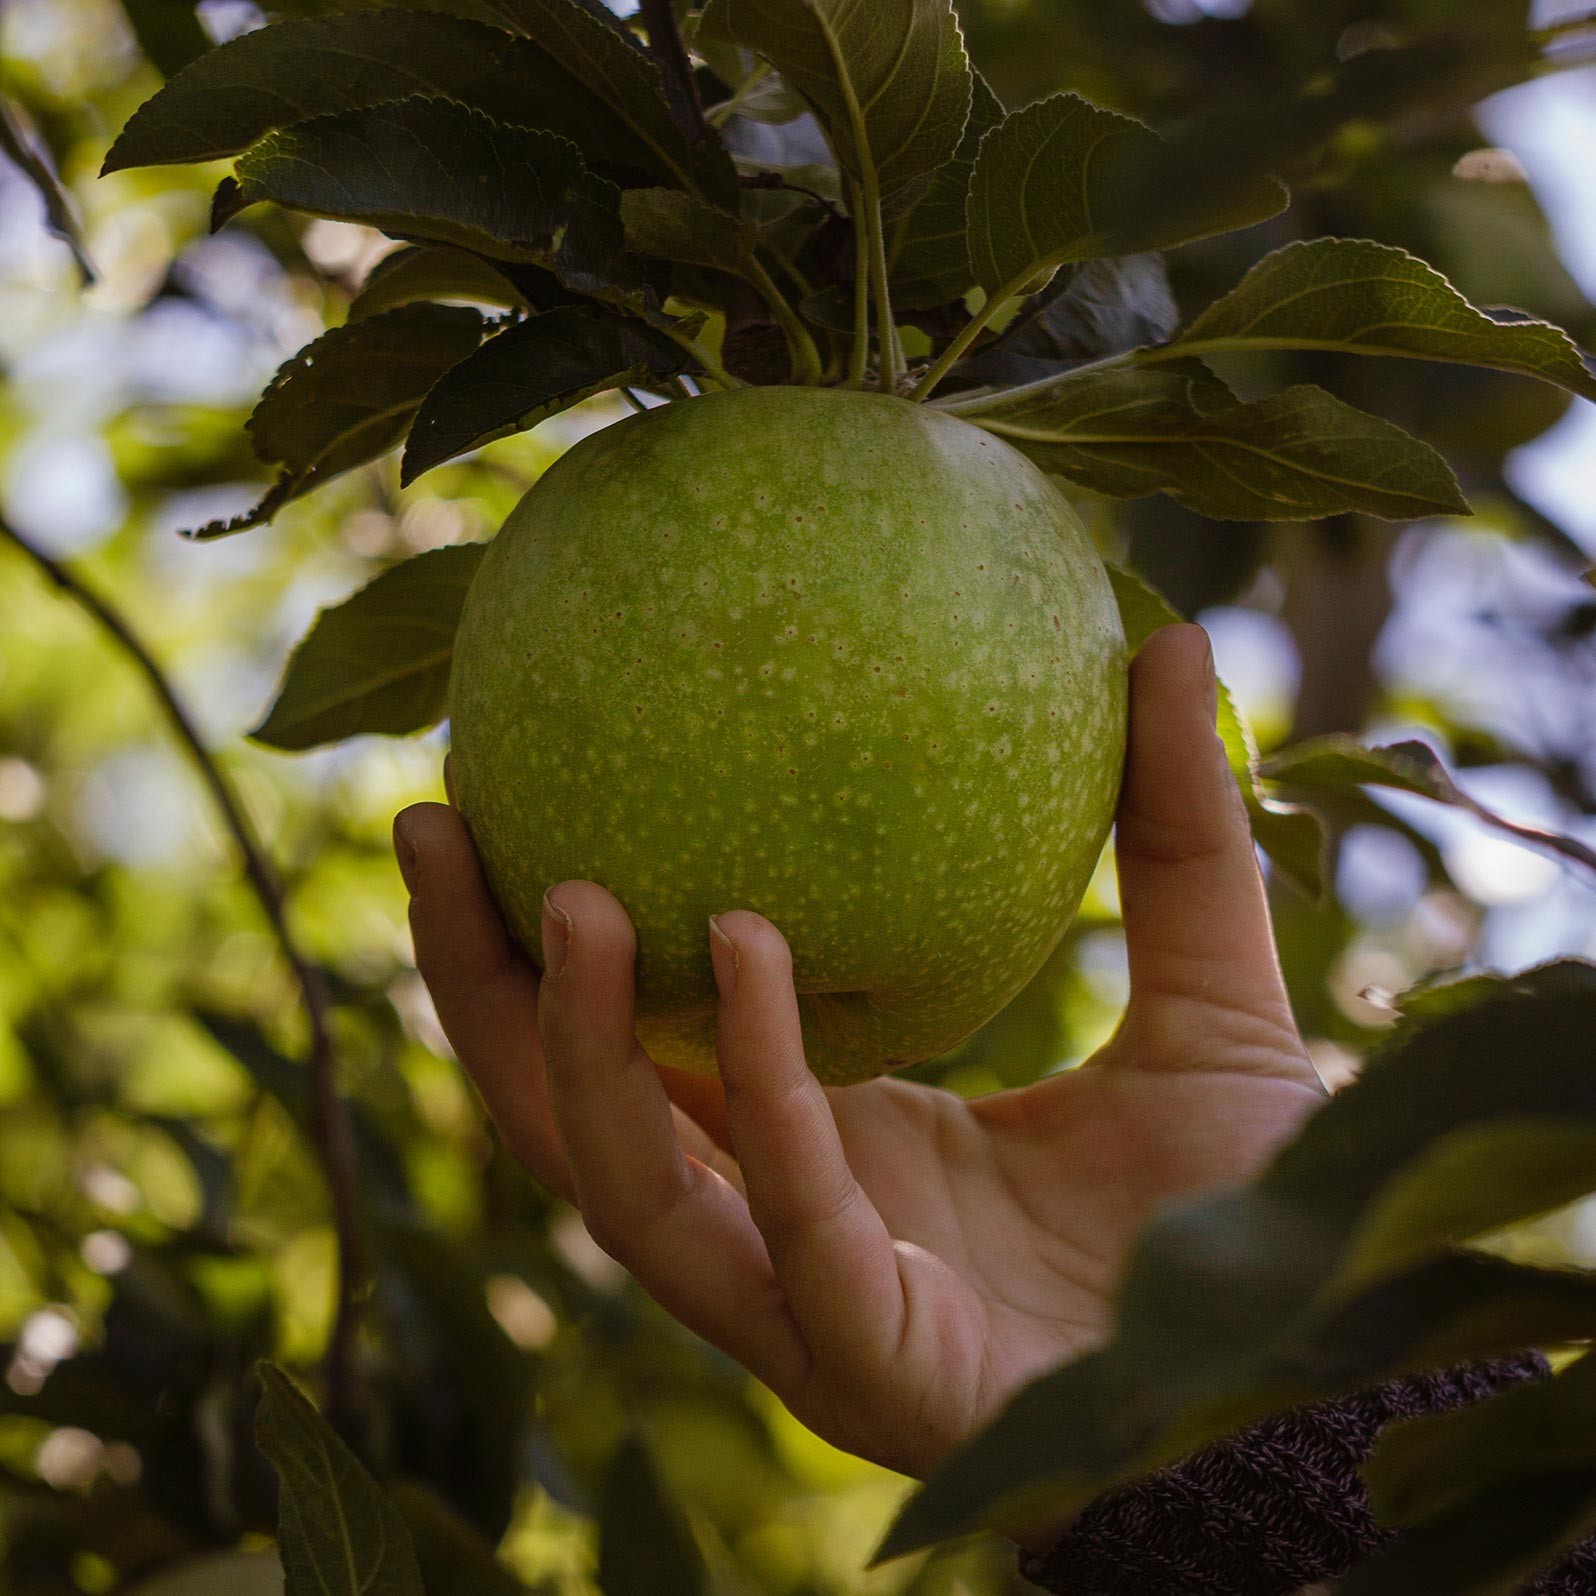 Image of a hand picking a green apple from a tree